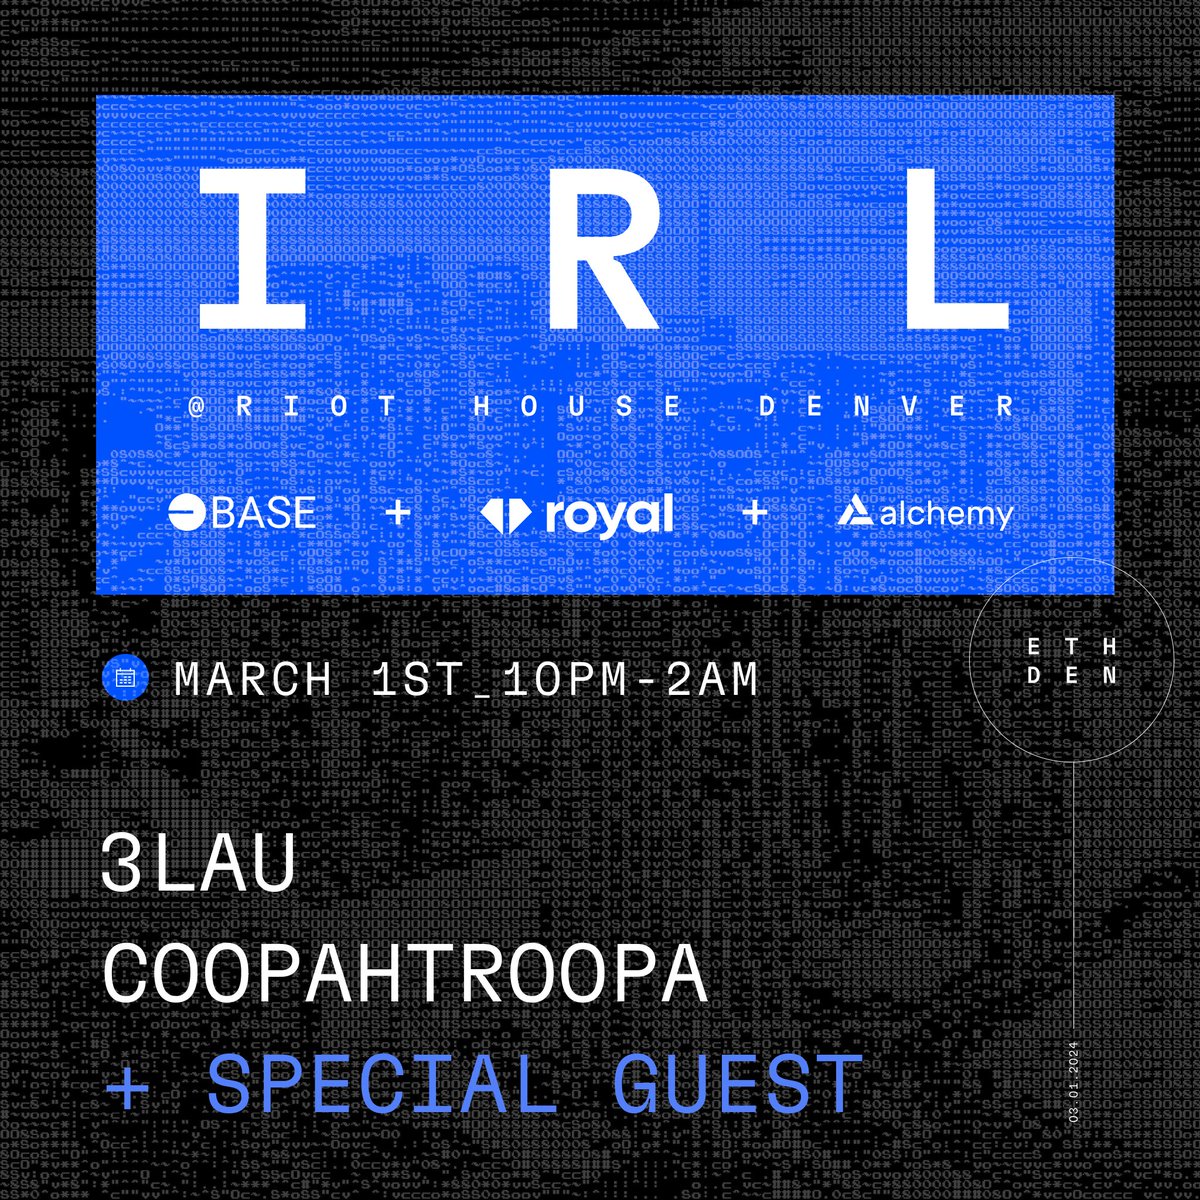 We are SO HYPED to tell you… We’re throwing a massive party with @base @alchemyplatform @joinroyal DJ sets by me + @Cooopahtroopa + a surprise! RSVP: lu.ma/w15qrcht